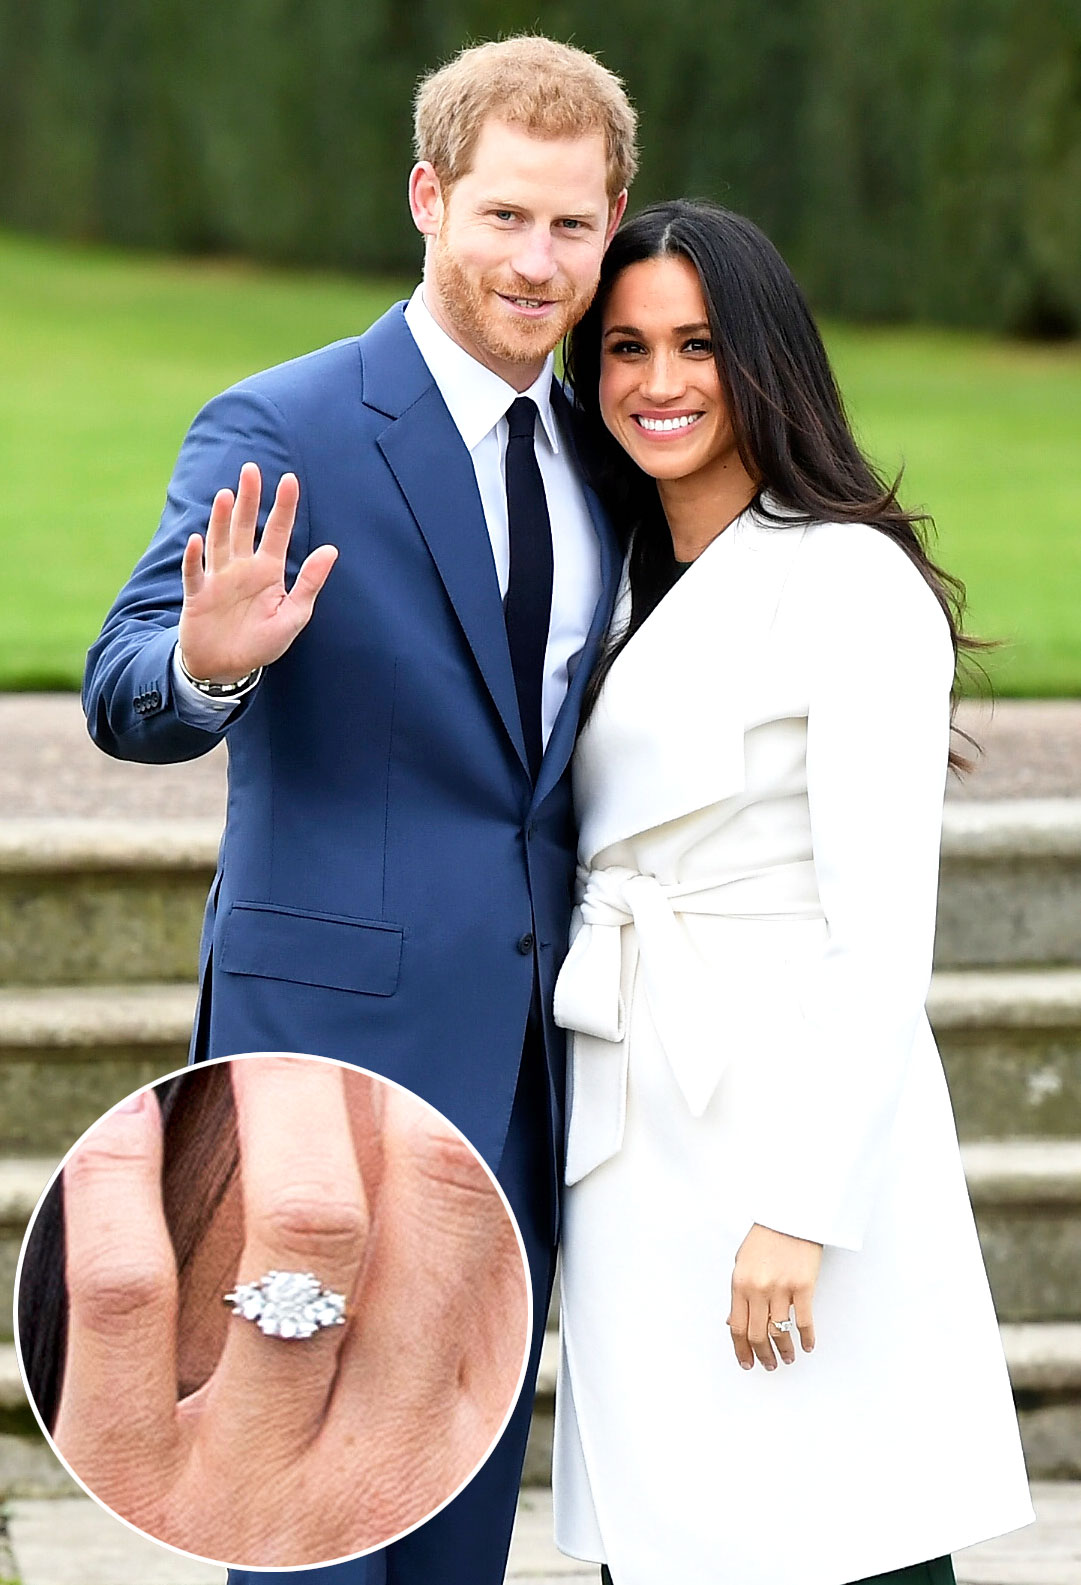 Meghan Markle Engagement Ring Change, Redesign: Photos